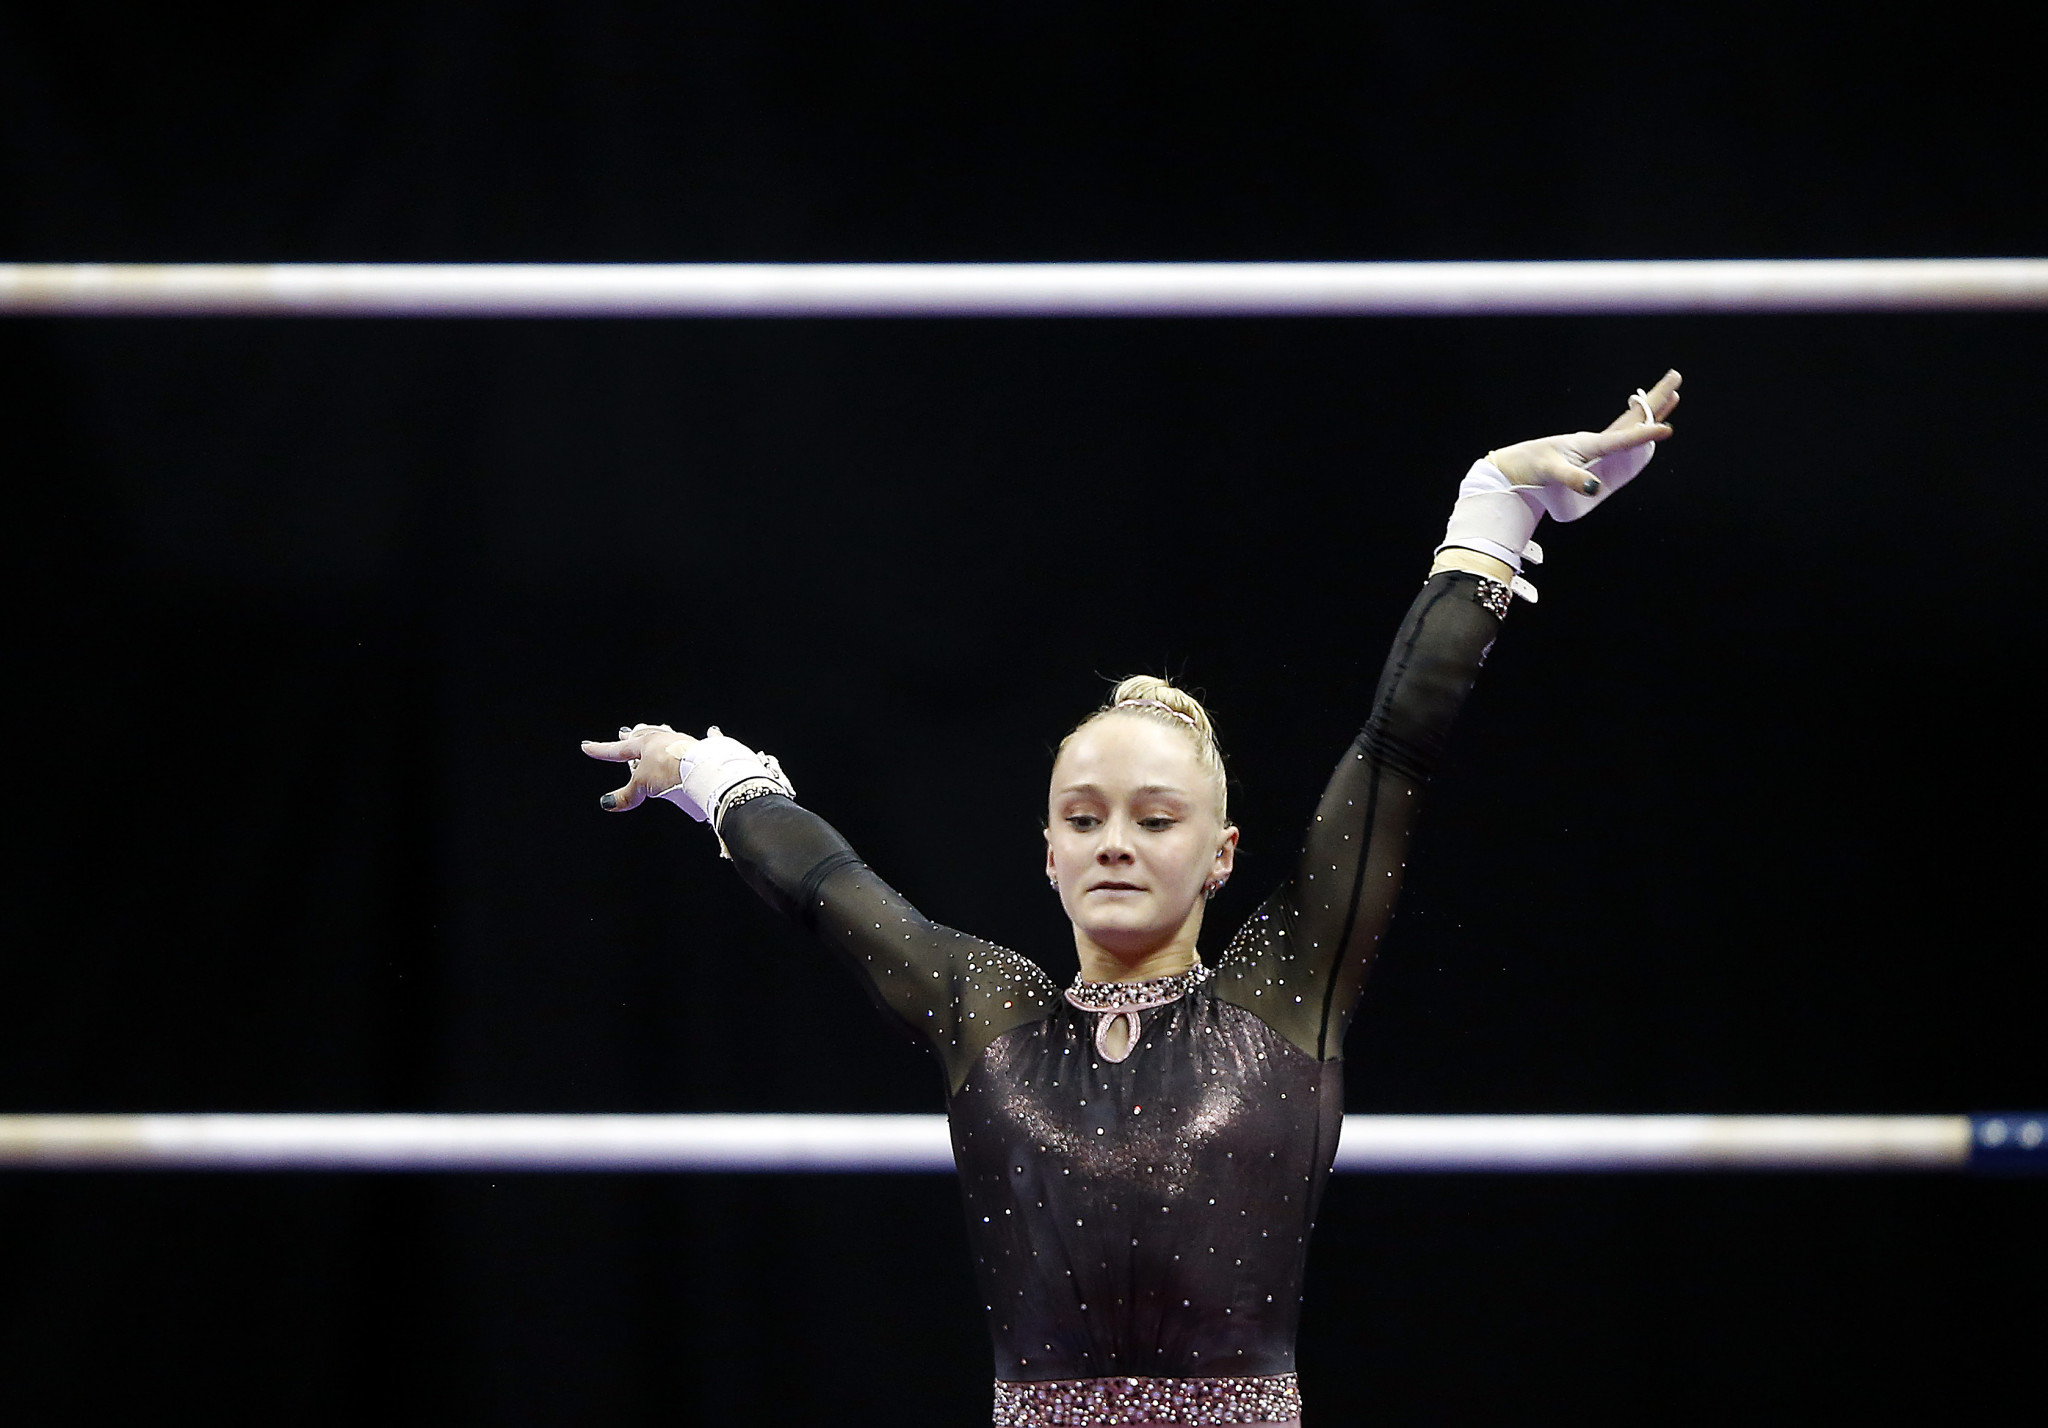 Riley McCusker is among the American gymnasts coached by Maggie Haney ©Getty Images